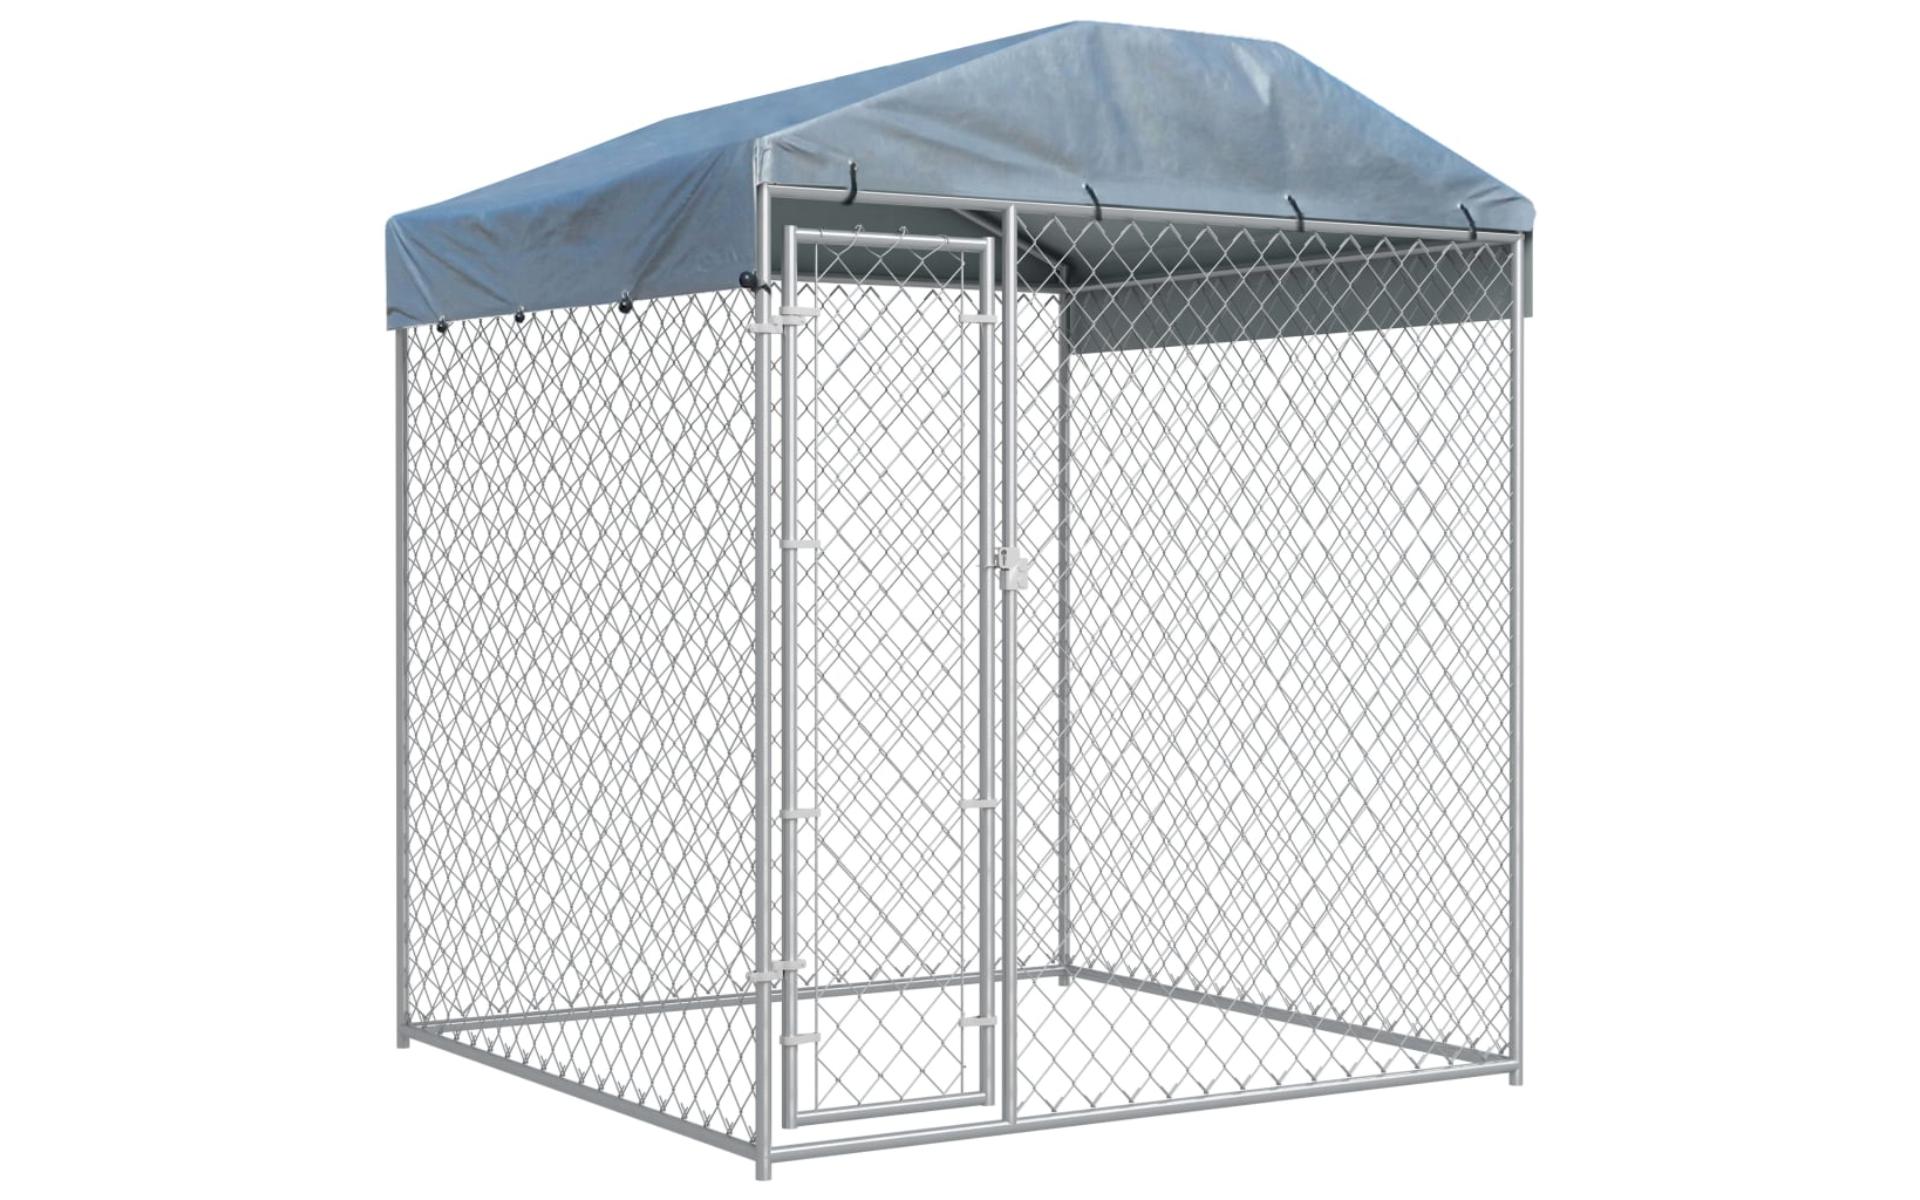 Outdoor kennel with roof for dogs 193x193x225 cm